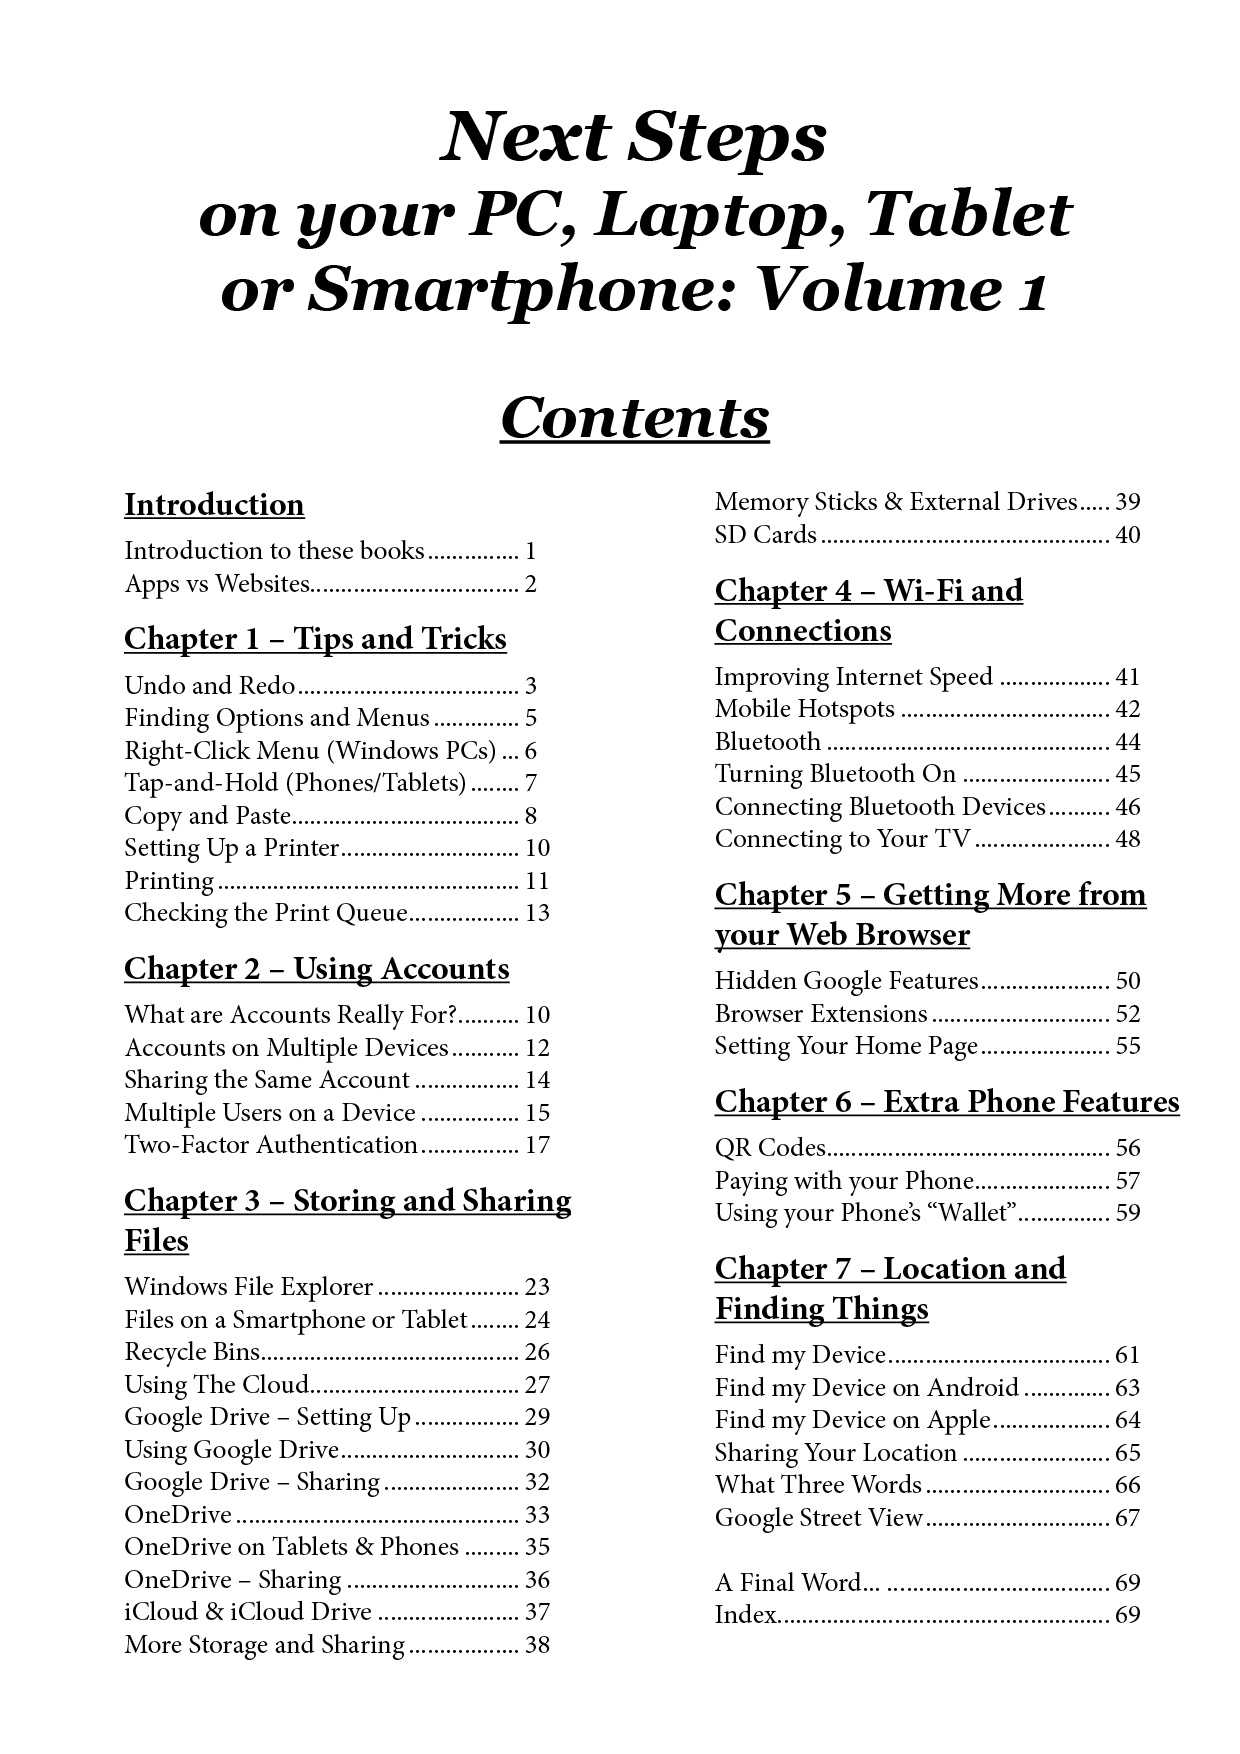 Next Steps on your PC, Laptop or Smartphone vol one contents page.